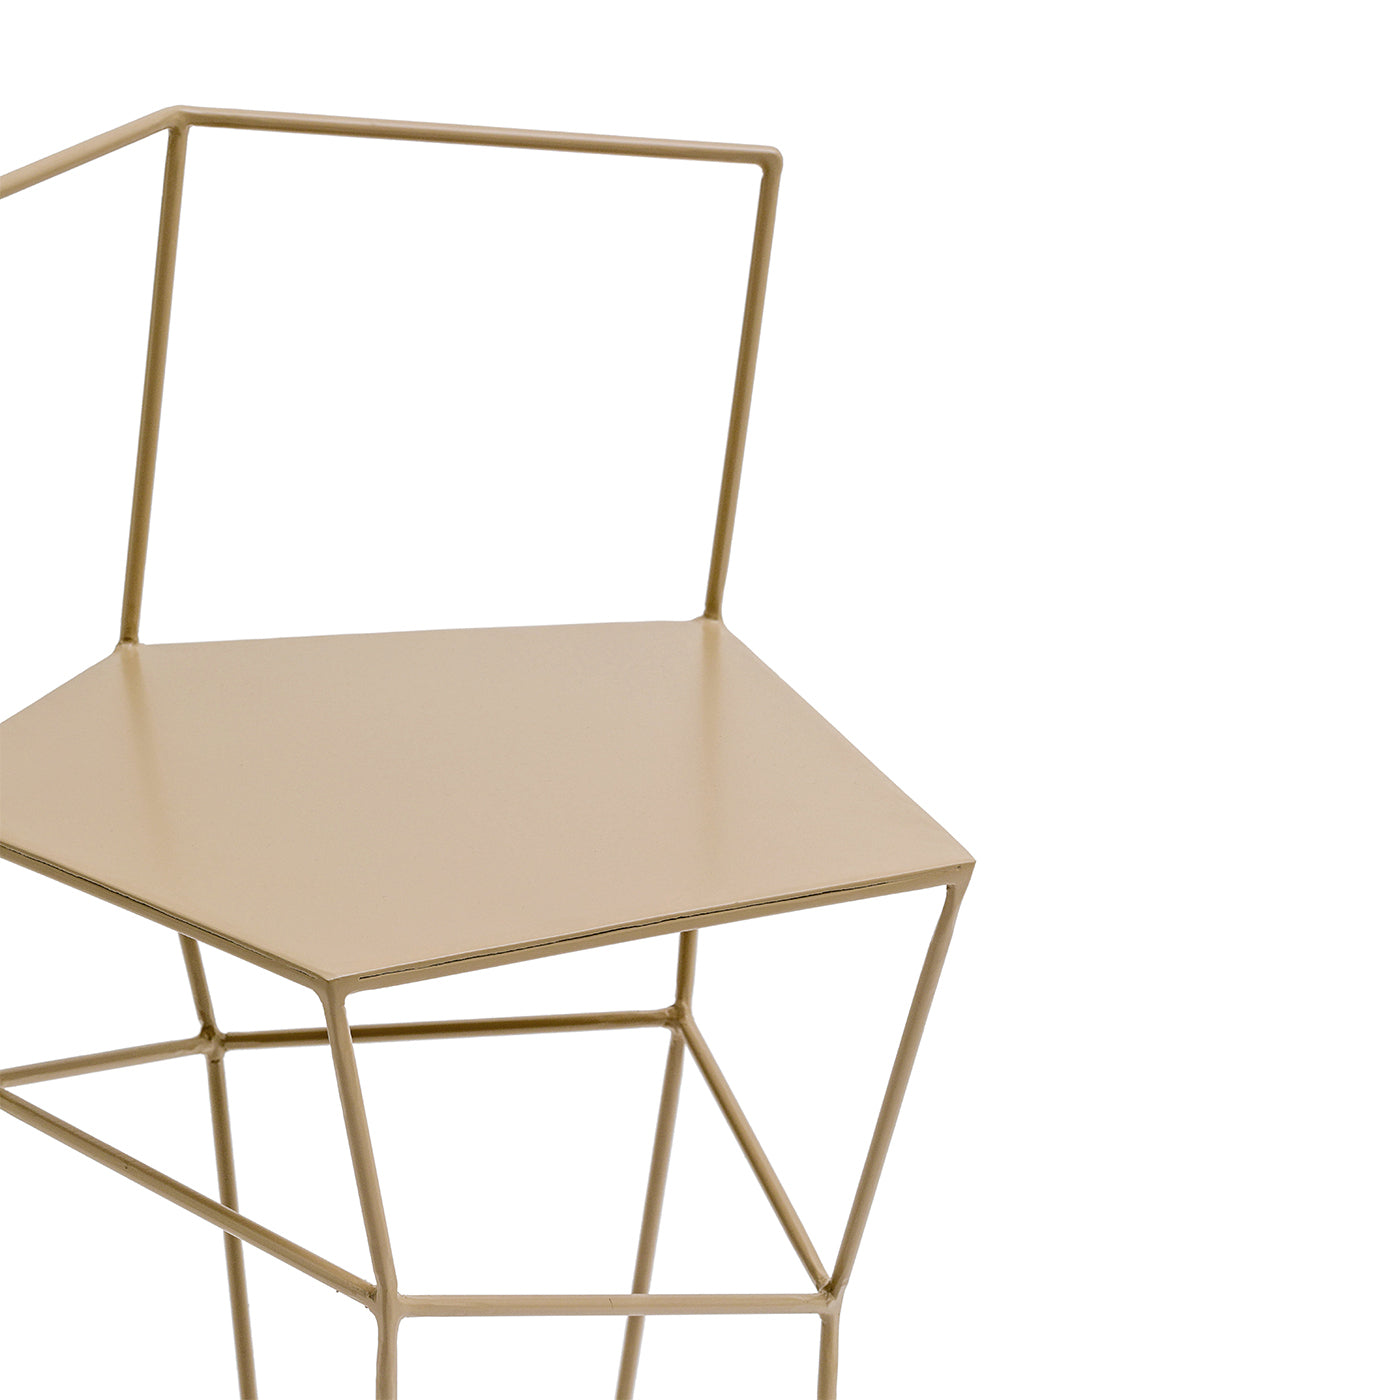 Cappuccino Stool with Backrest - Alternative view 2